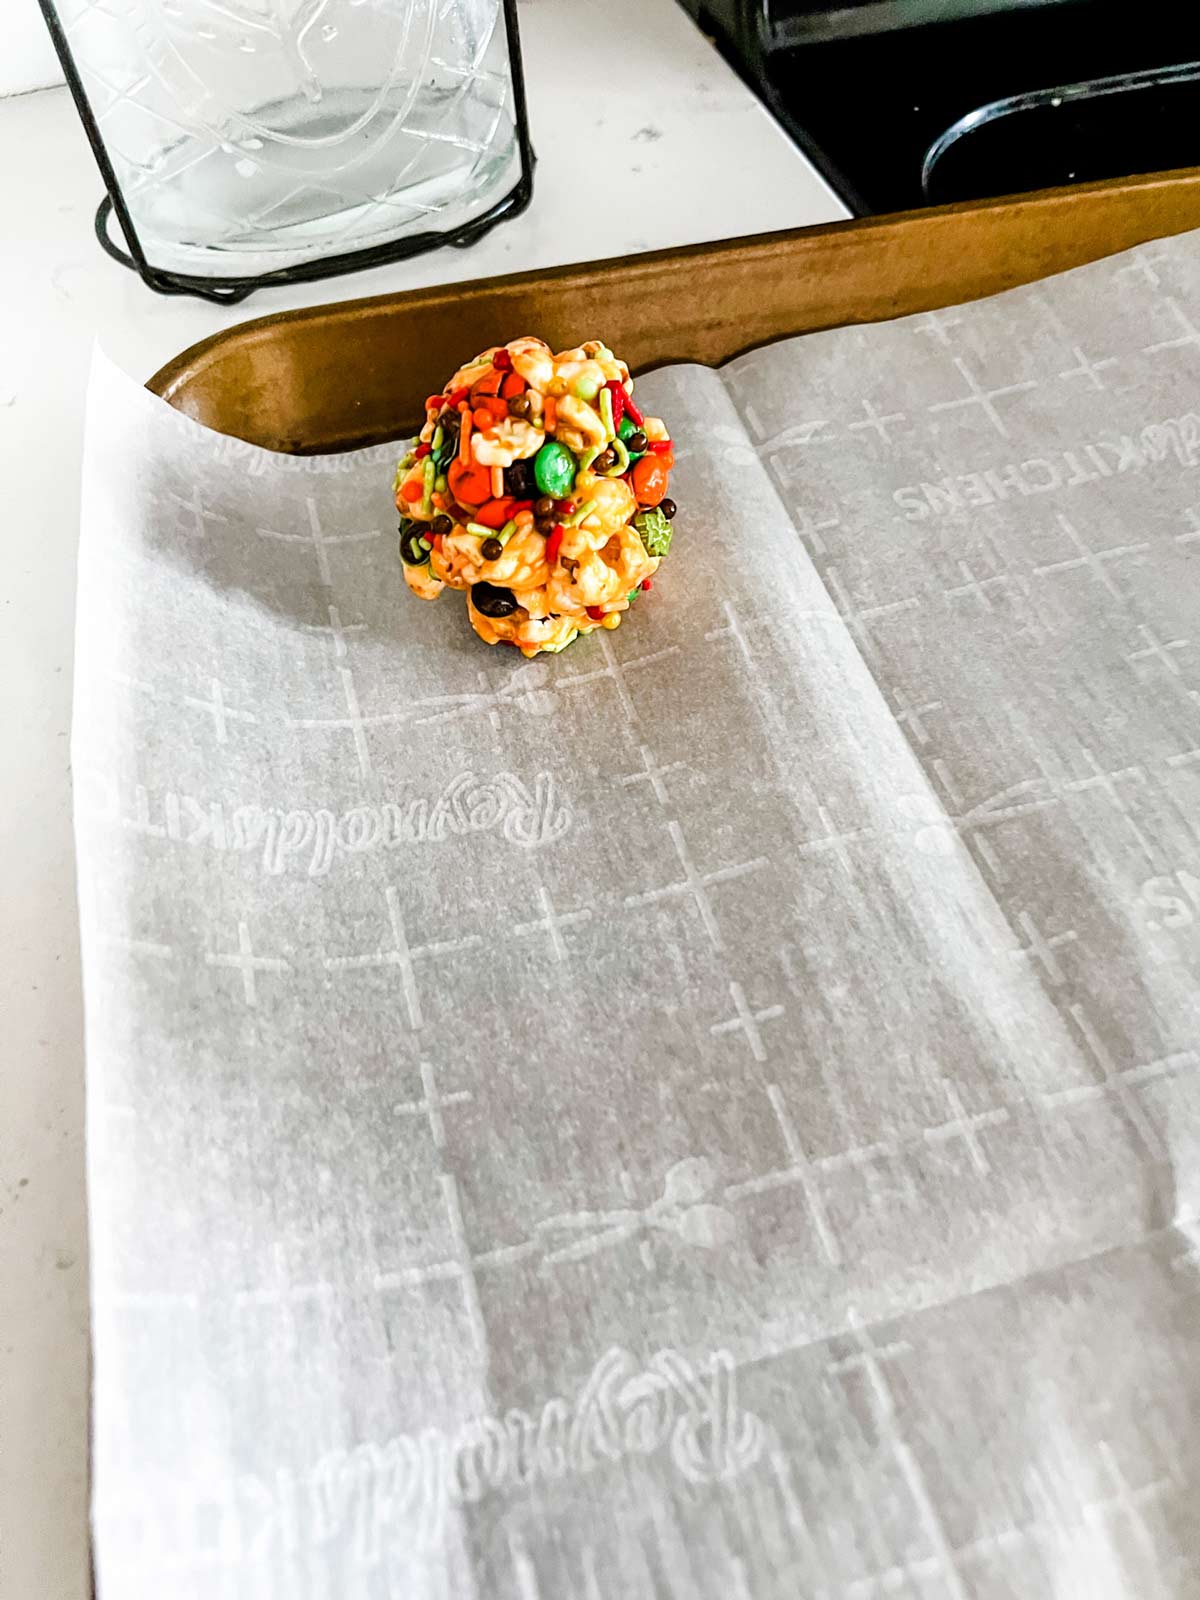 Halloween popcorn ball that has been rolled in sprinkles and placed on a parchment lined baking sheet.